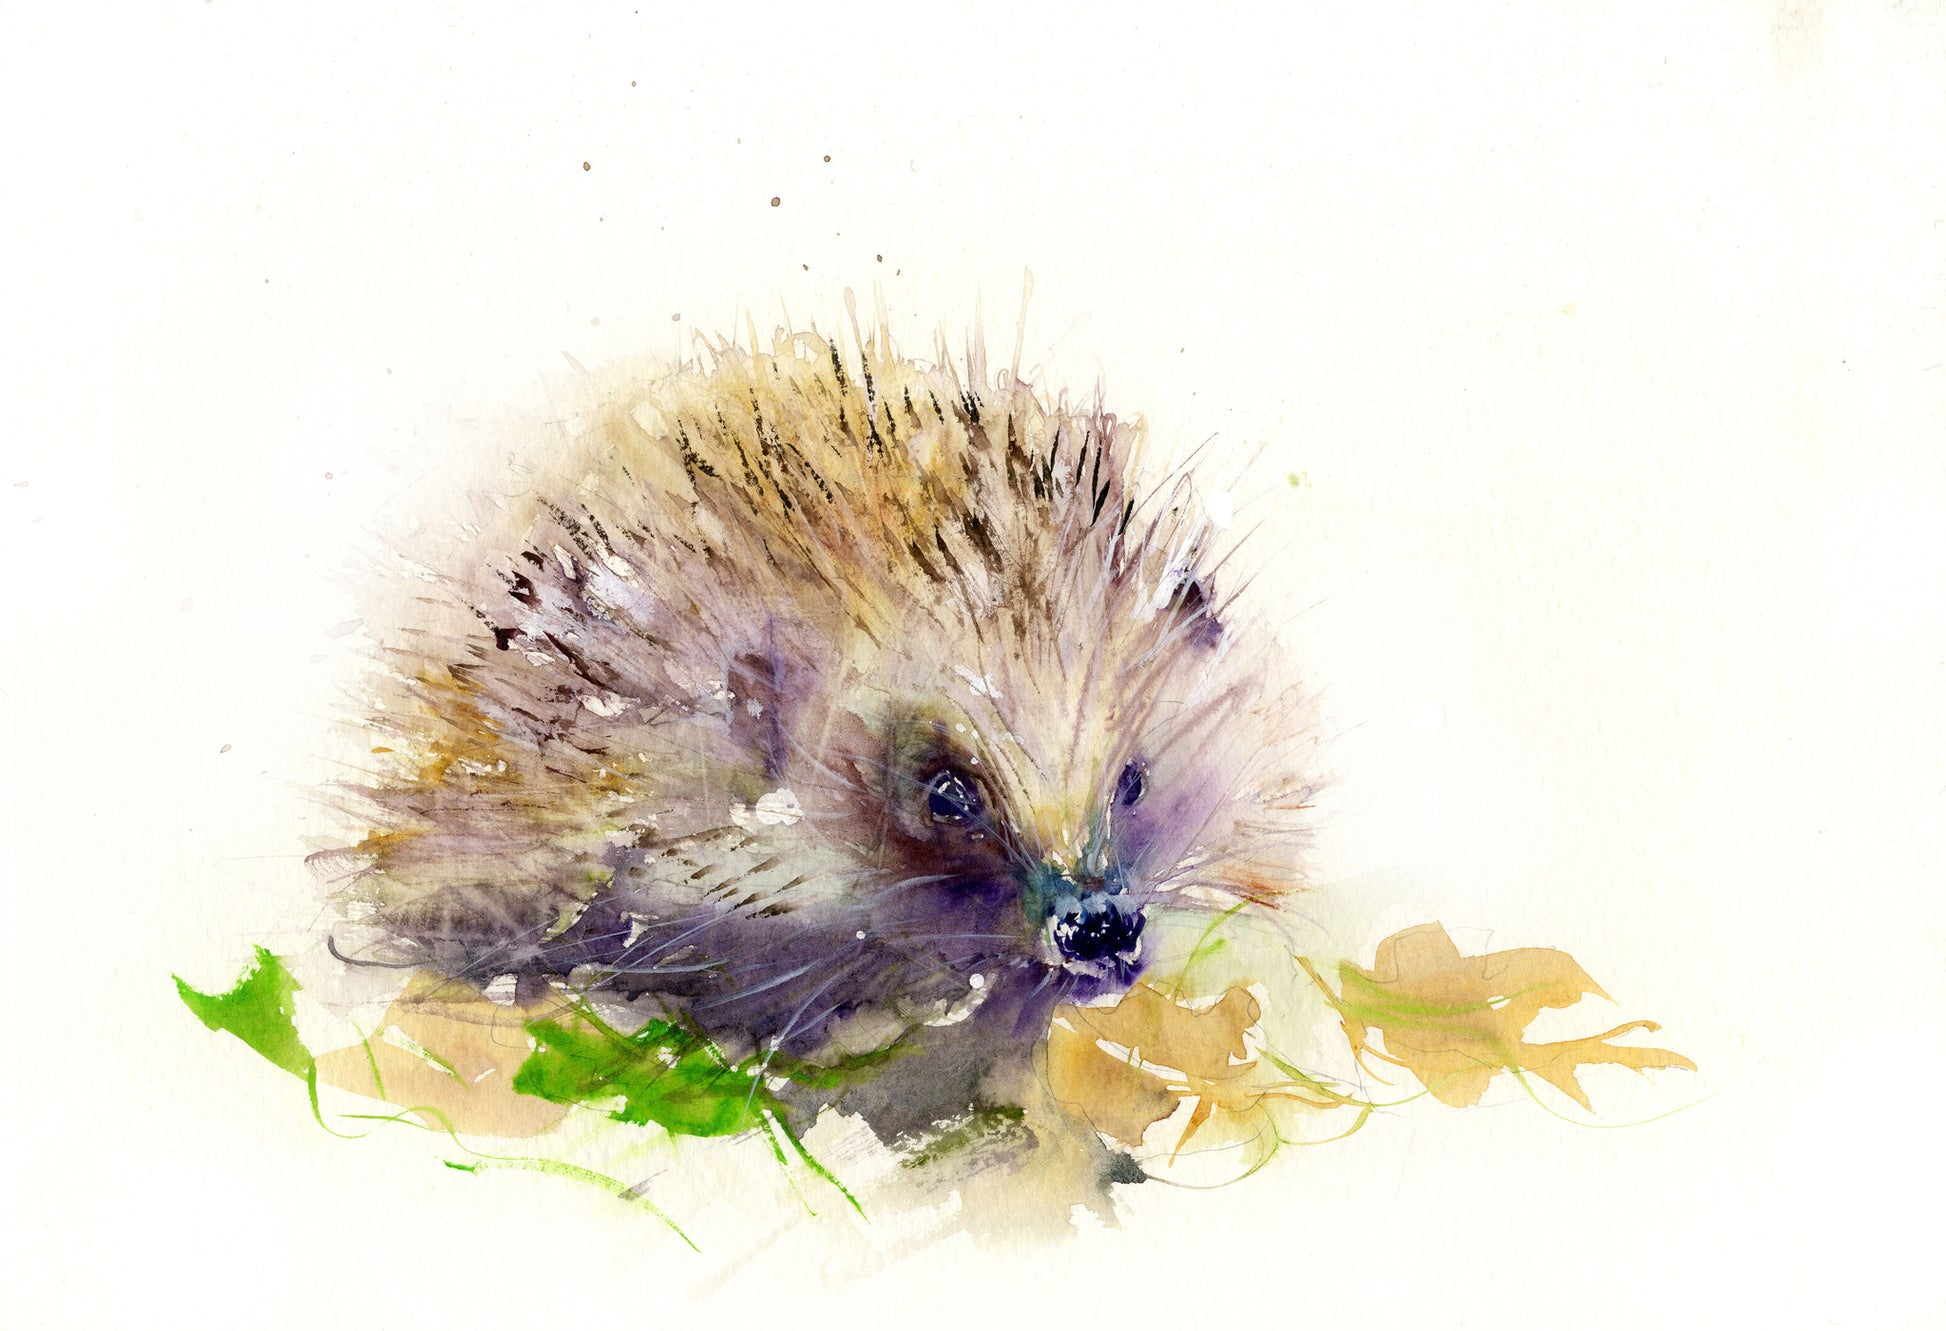 Limited edition print of a hedgehog